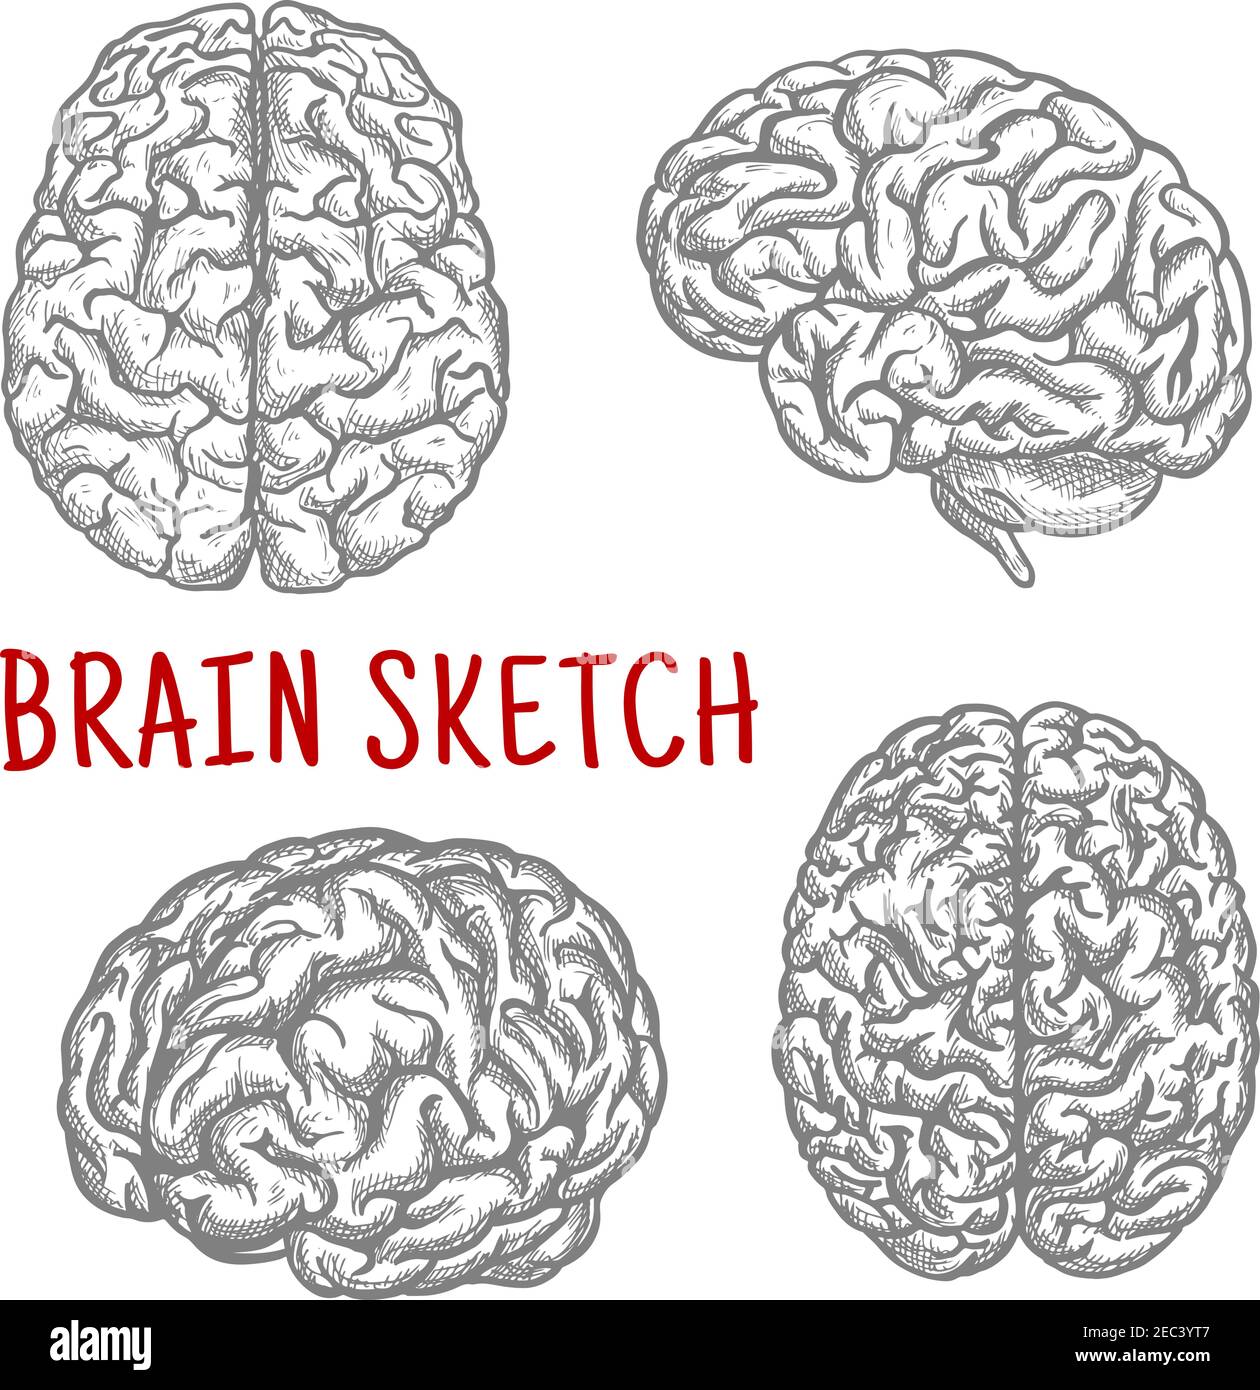 Brain sketch symbols with engraving illustrations of anatomically detailed human brain at different angles. Great for intellect and mind concept or t- Stock Vector